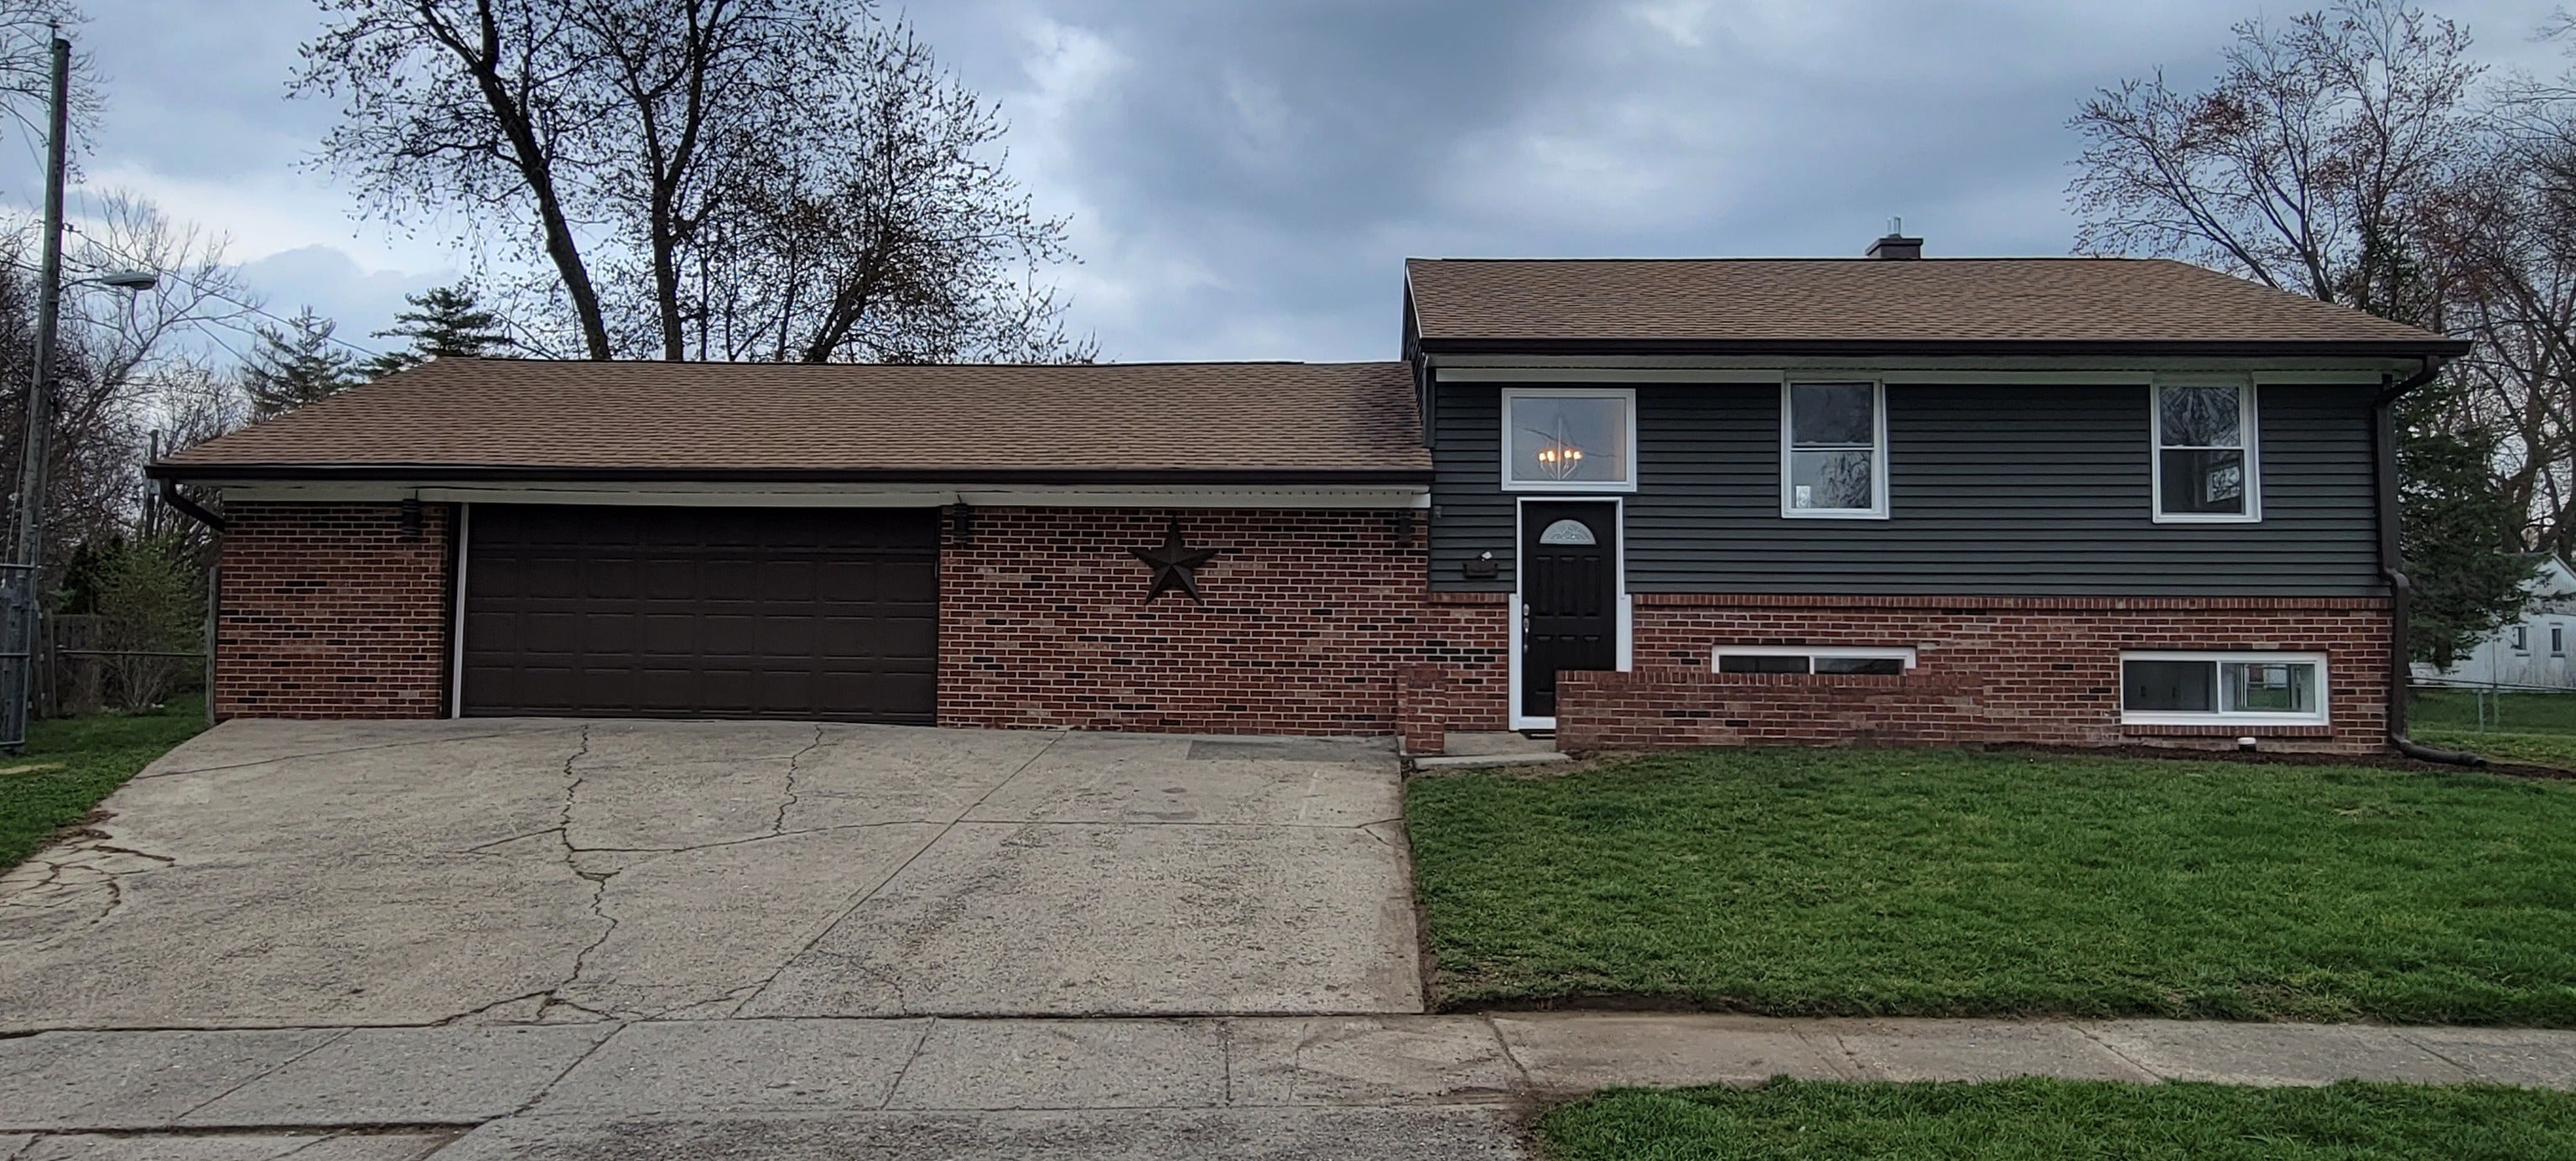 Photo of 3545 N Galeston Avenue Indianapolis, IN 46235